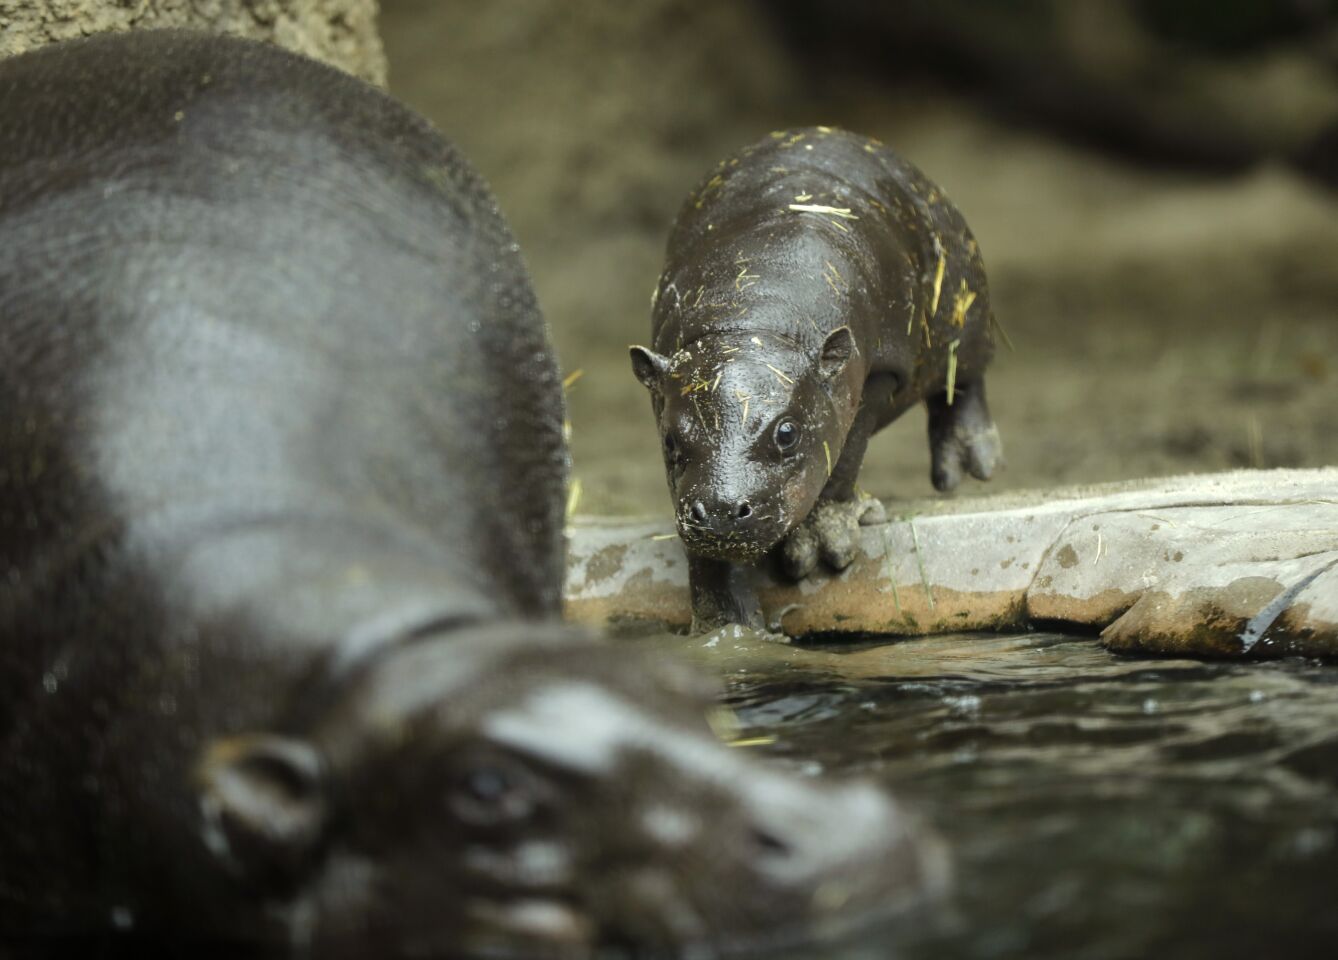 Akobi, a 40-pound, 67-day-old pygmy hippopotamus, follows his mom Mabel into the water at the San Diego Zoo on June 15, 2020. Akobi was introduced to the public for the first time as it explored the main exhibit for the first time Monday.